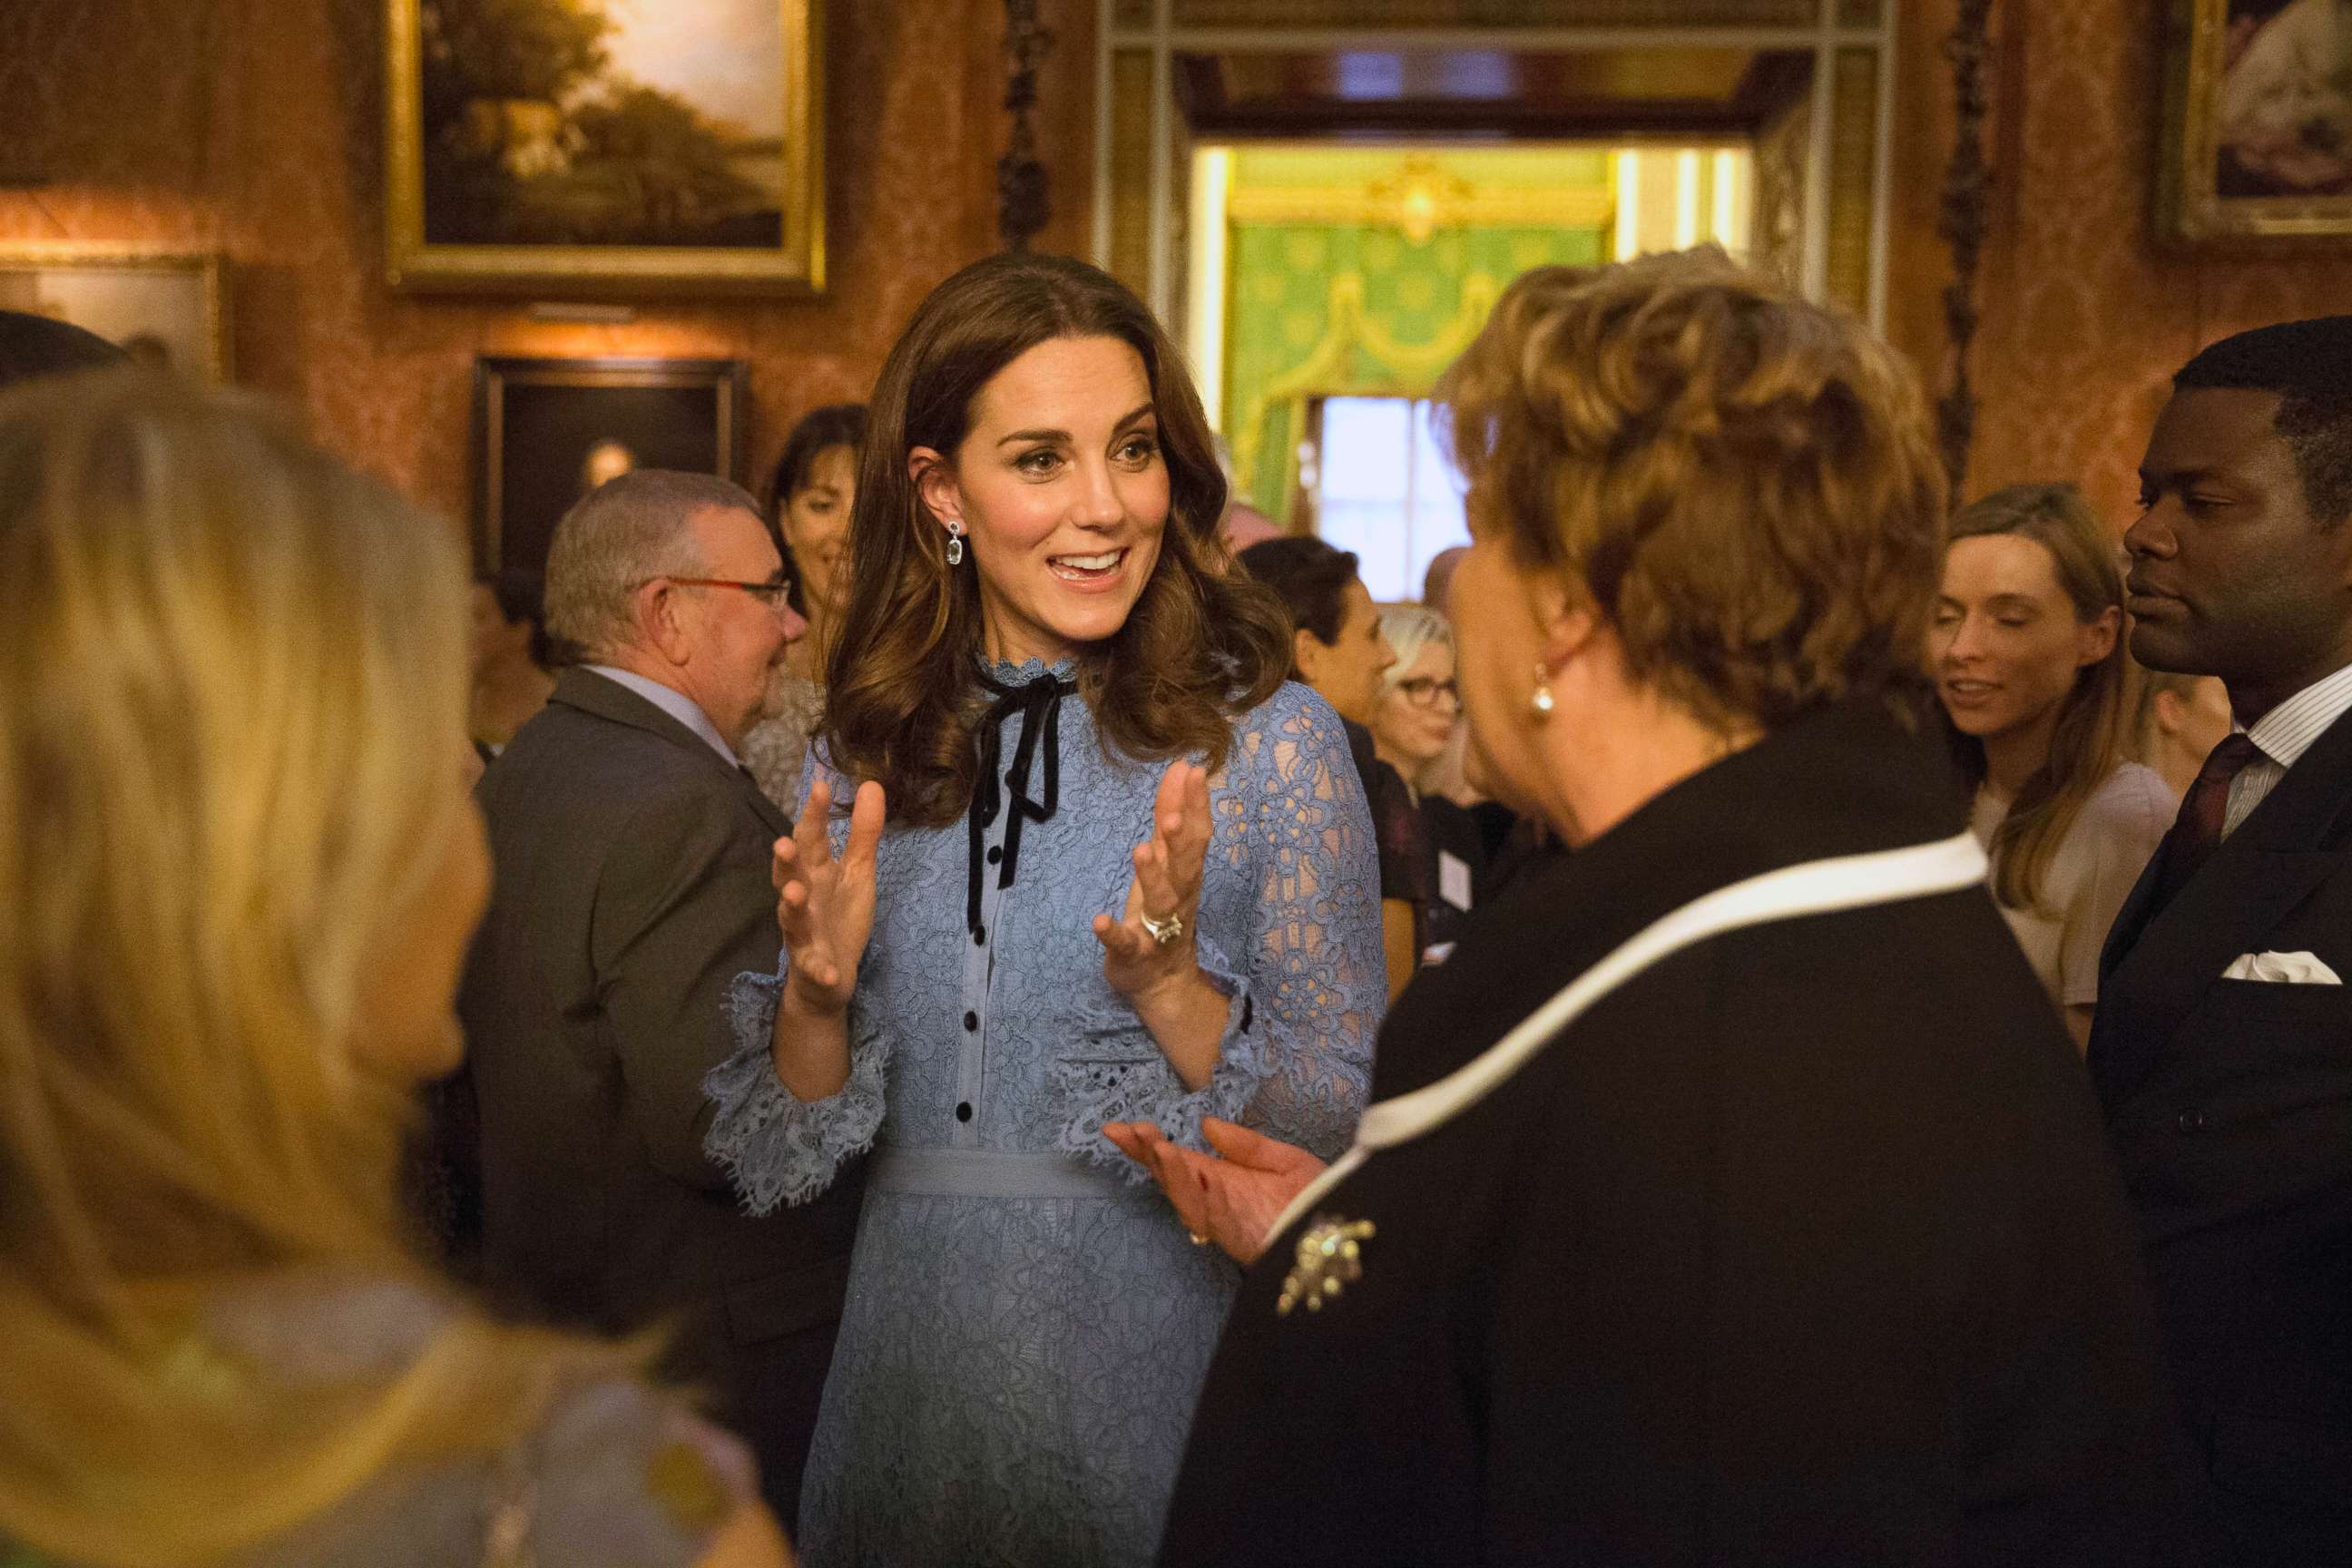 PHOTO: Prince William, Catherine Duchess of Cambridge and Prince Harry at a World Mental Health Day reception at Buckingham Palace in London, Oct. 10, 2017.